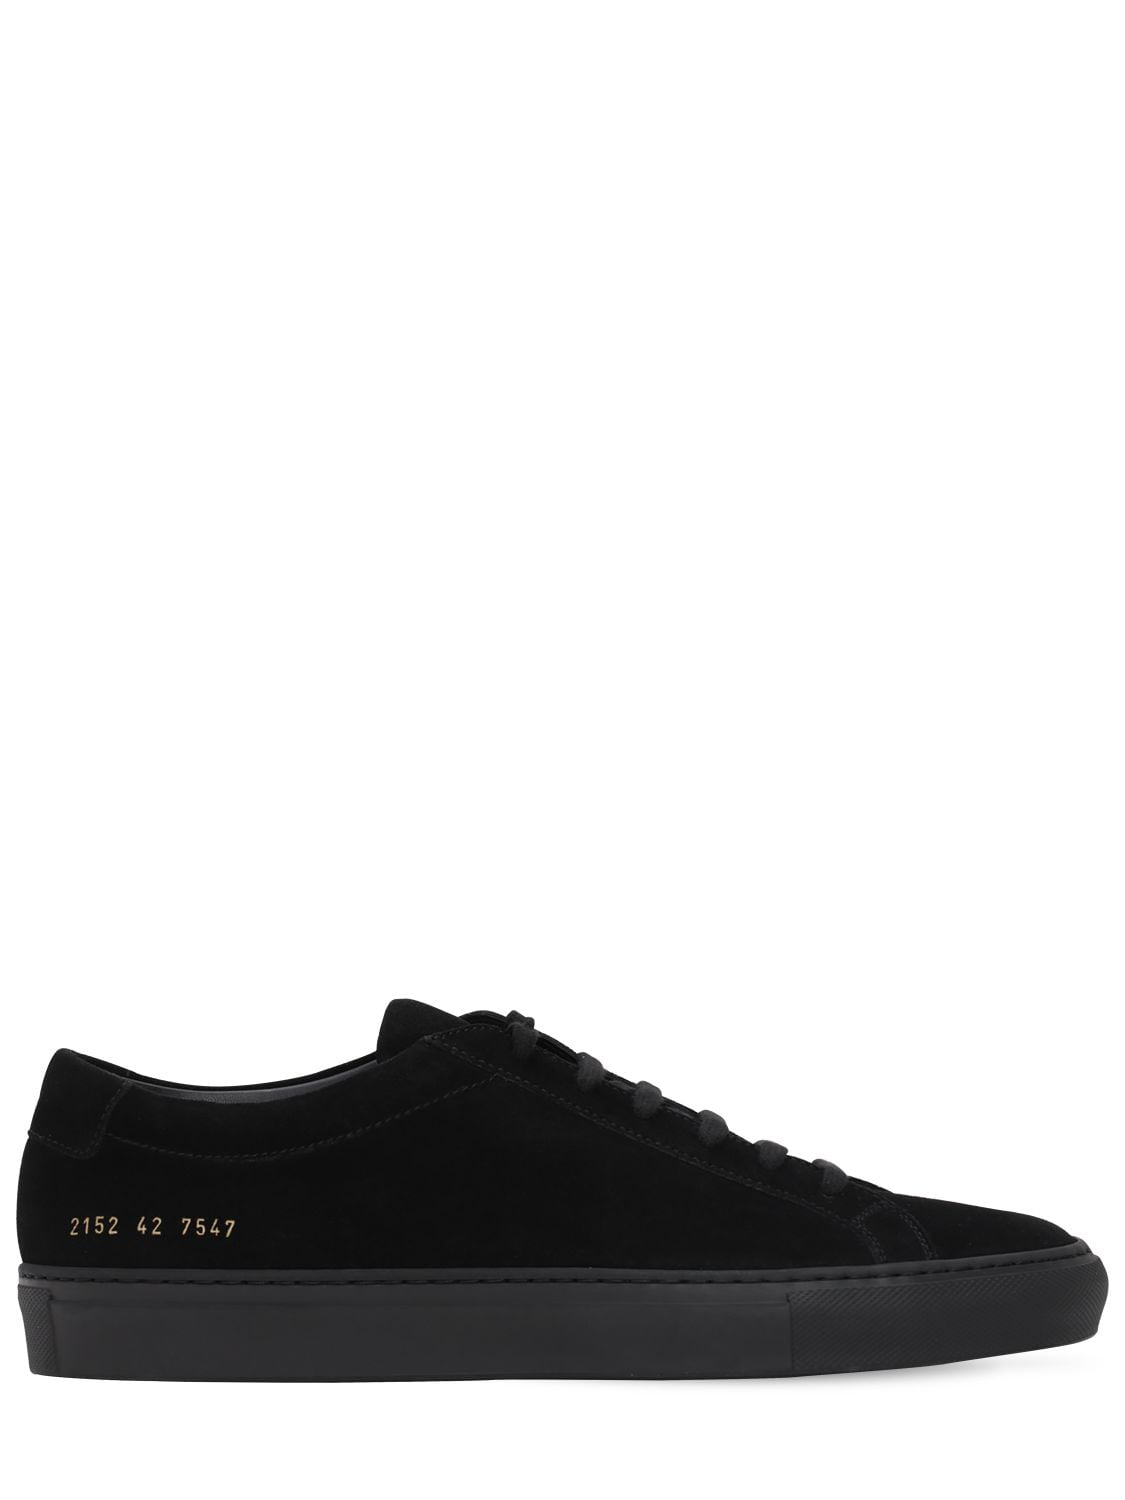 COMMON PROJECTS ORIGINAL ACHILLES SUEDE trainers,70I3J4001-NZU0NW2